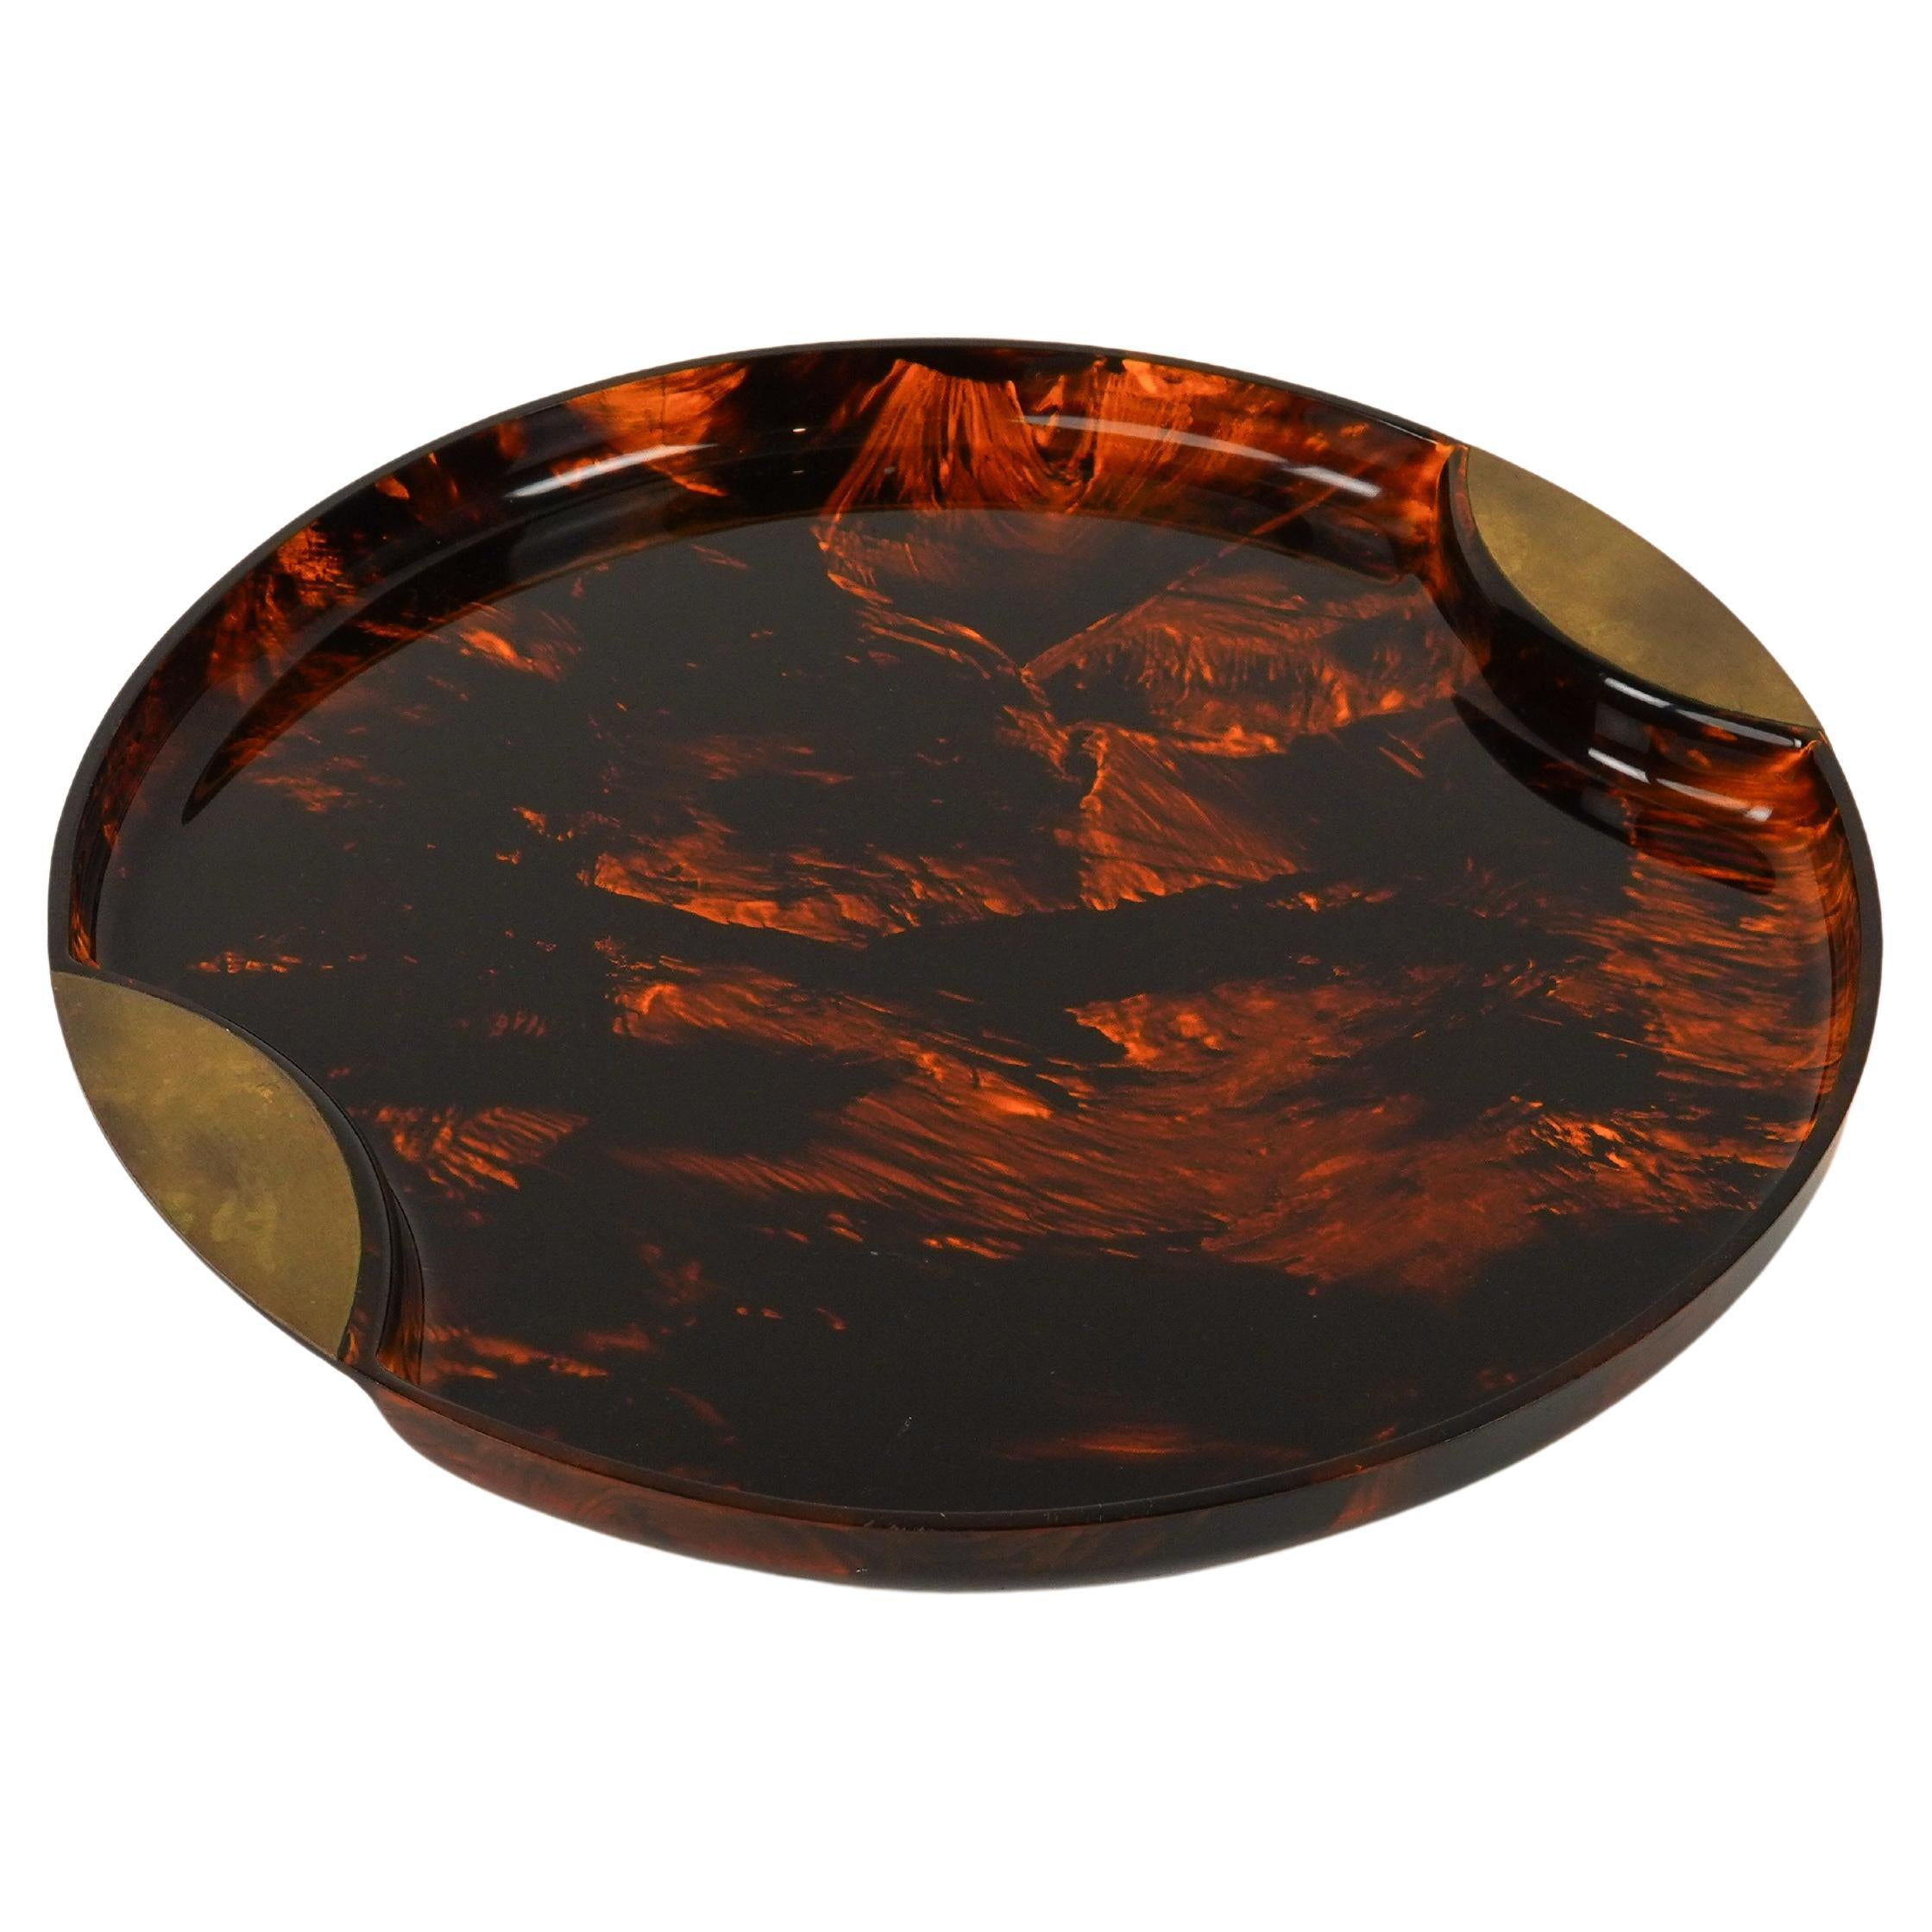 Midcentury amazing round serving tray or centerpiece in lucite faux tortoiseshell effect and brass handles by Team Guzzini.

Made in Italy in the 1970s.

The original label is still attached as shown in the pictures.

It's an iconic tray or plate